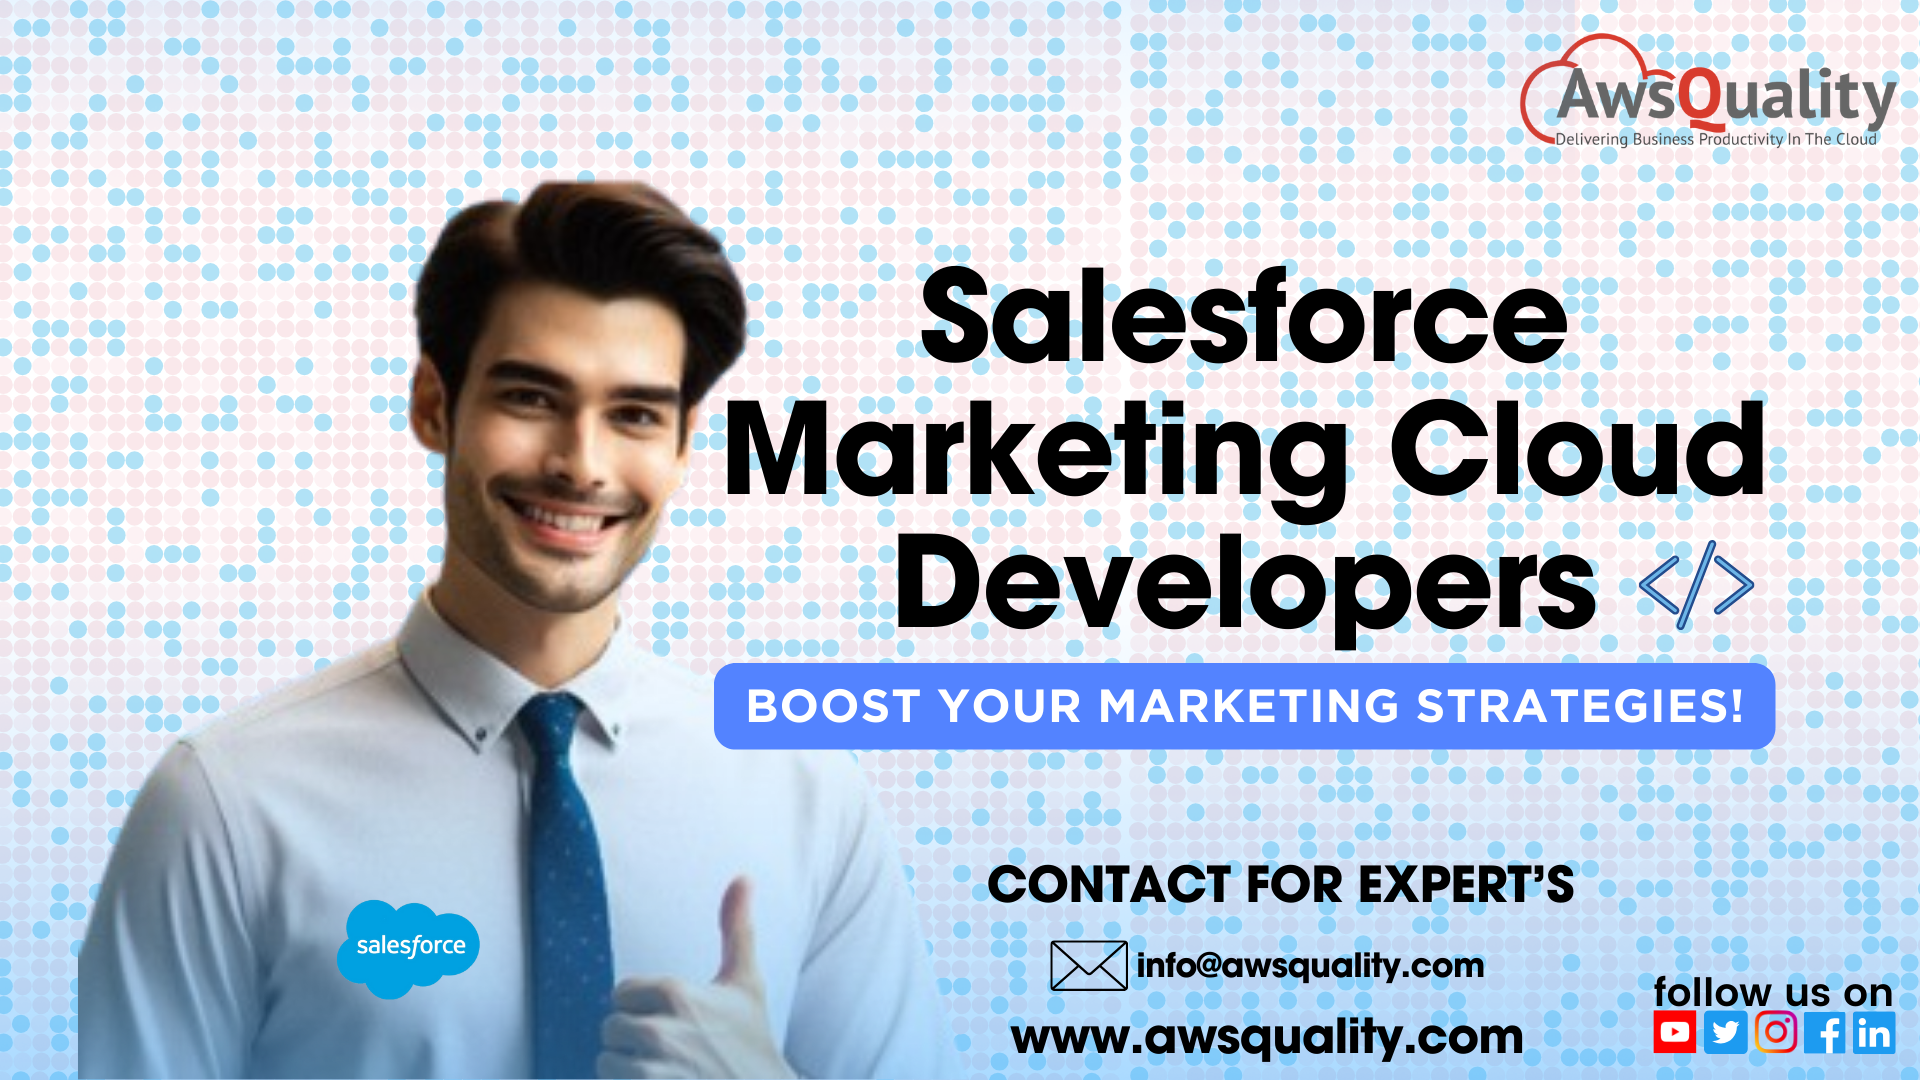 **SEO Title:** Expert Salesforce Marketing Cloud Developer Services | AwsQuality **Meta Description:** At AwsQuality, our expert Salesforce Marketing Cloud developers streamline marketing operations, increase engagement, and boost sales. Get top-notch Salesforce consulting services now! **Slug:** salesforce-marketing-cloud-developer-services **Keyphrase:** Salesforce Marketing Cloud Developer Services